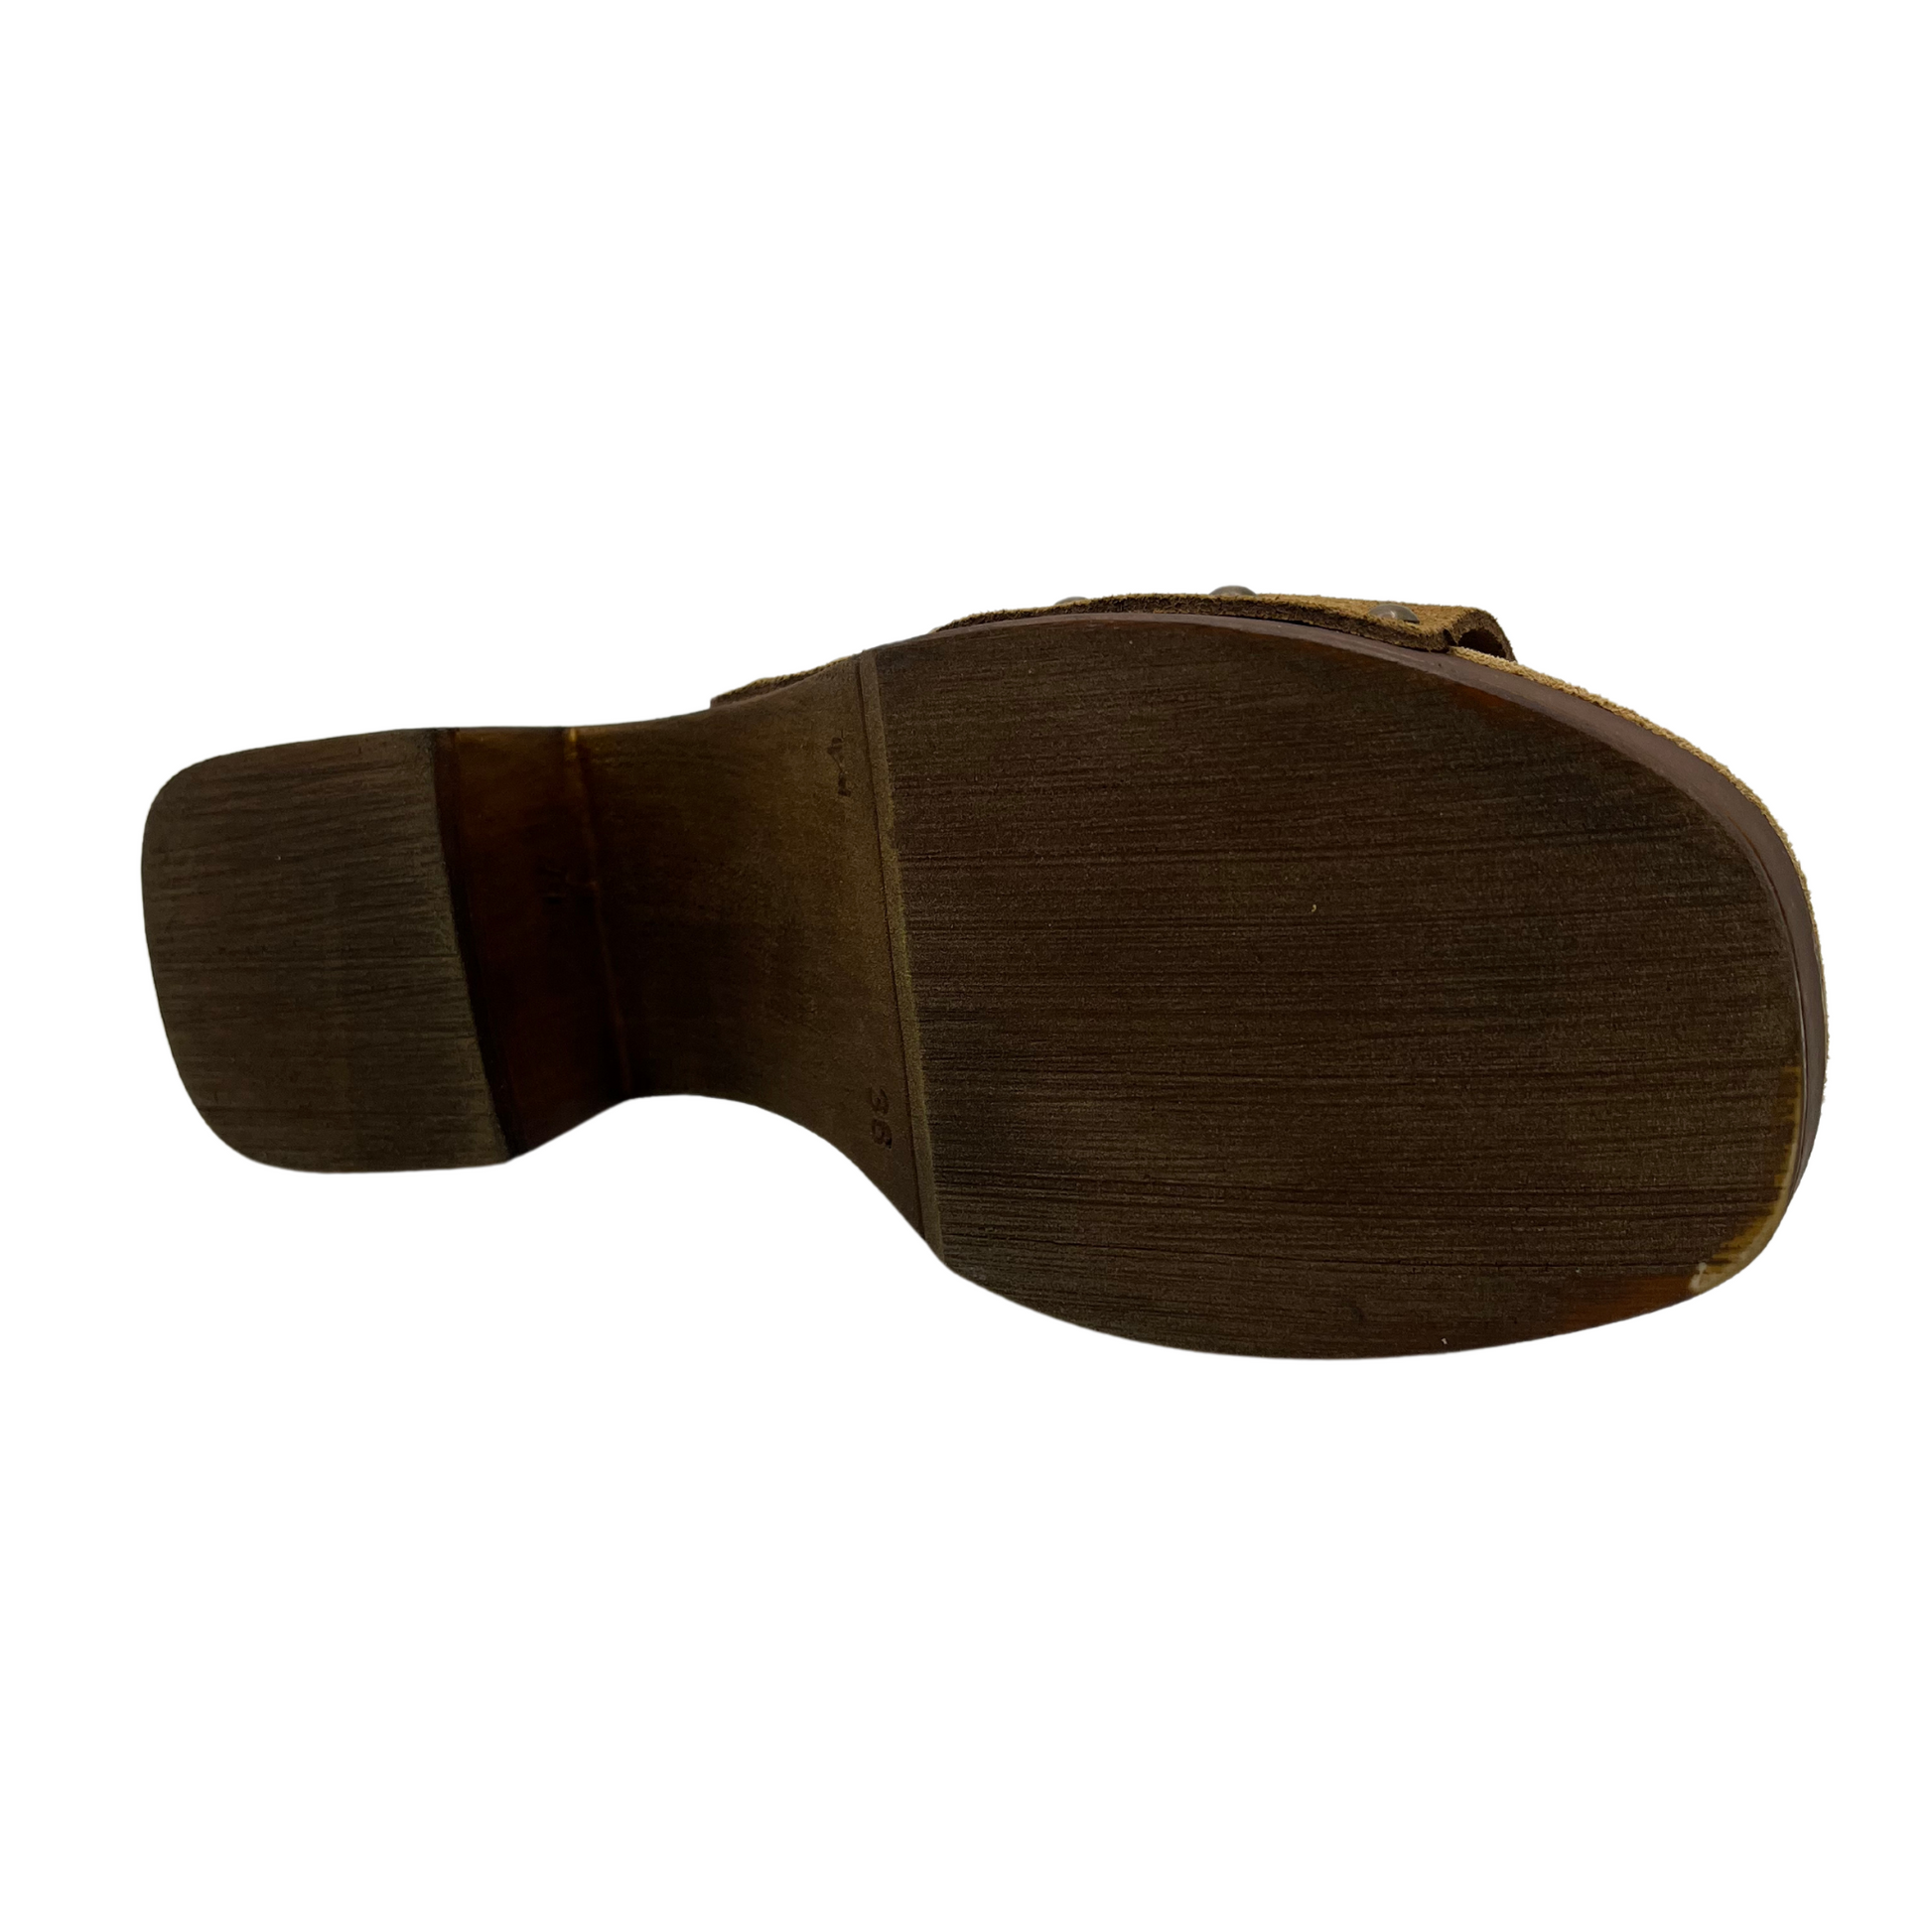 Bottom view of brown suede sandals with chunky block heel and suede lined footbed